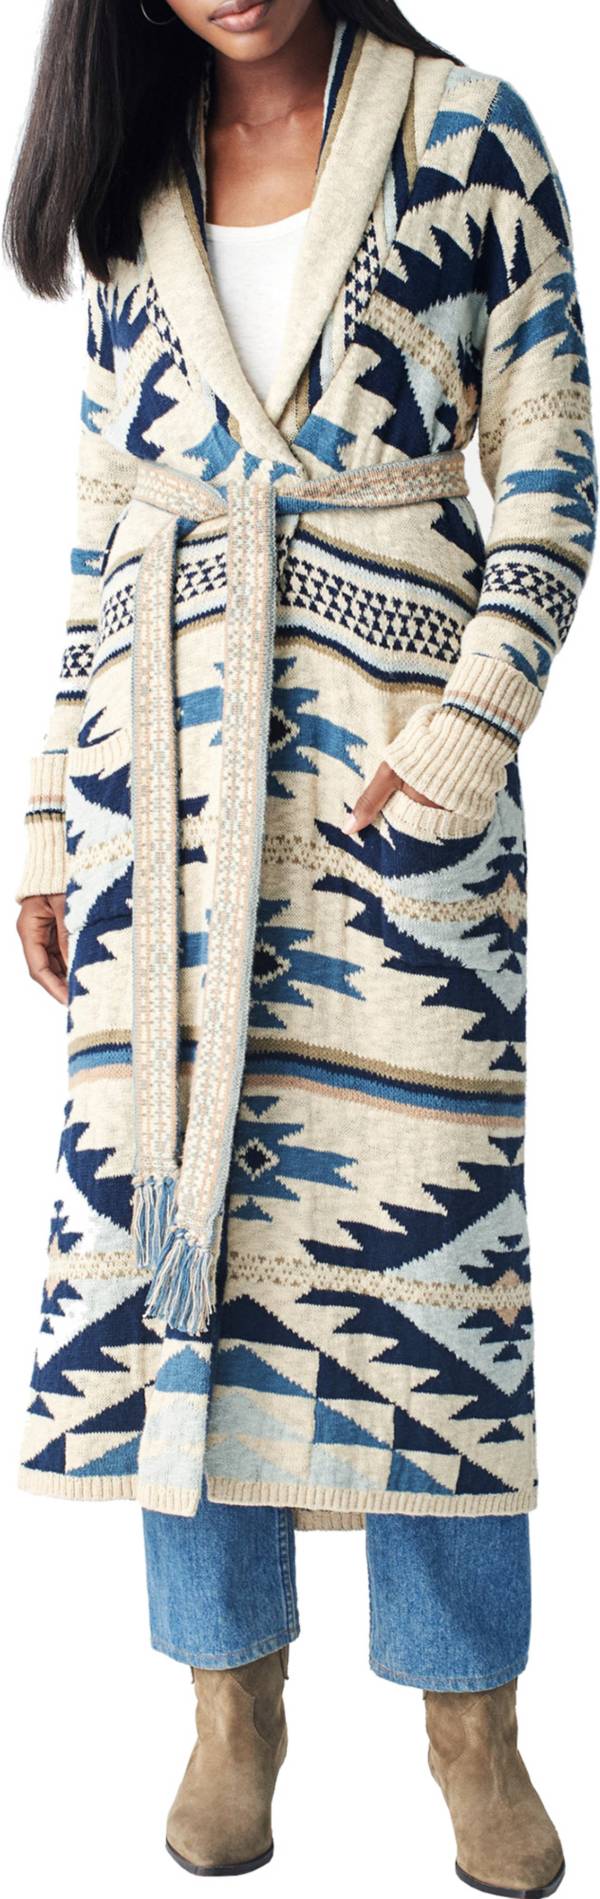 Faherty Women's Paloma Duster Sweater product image